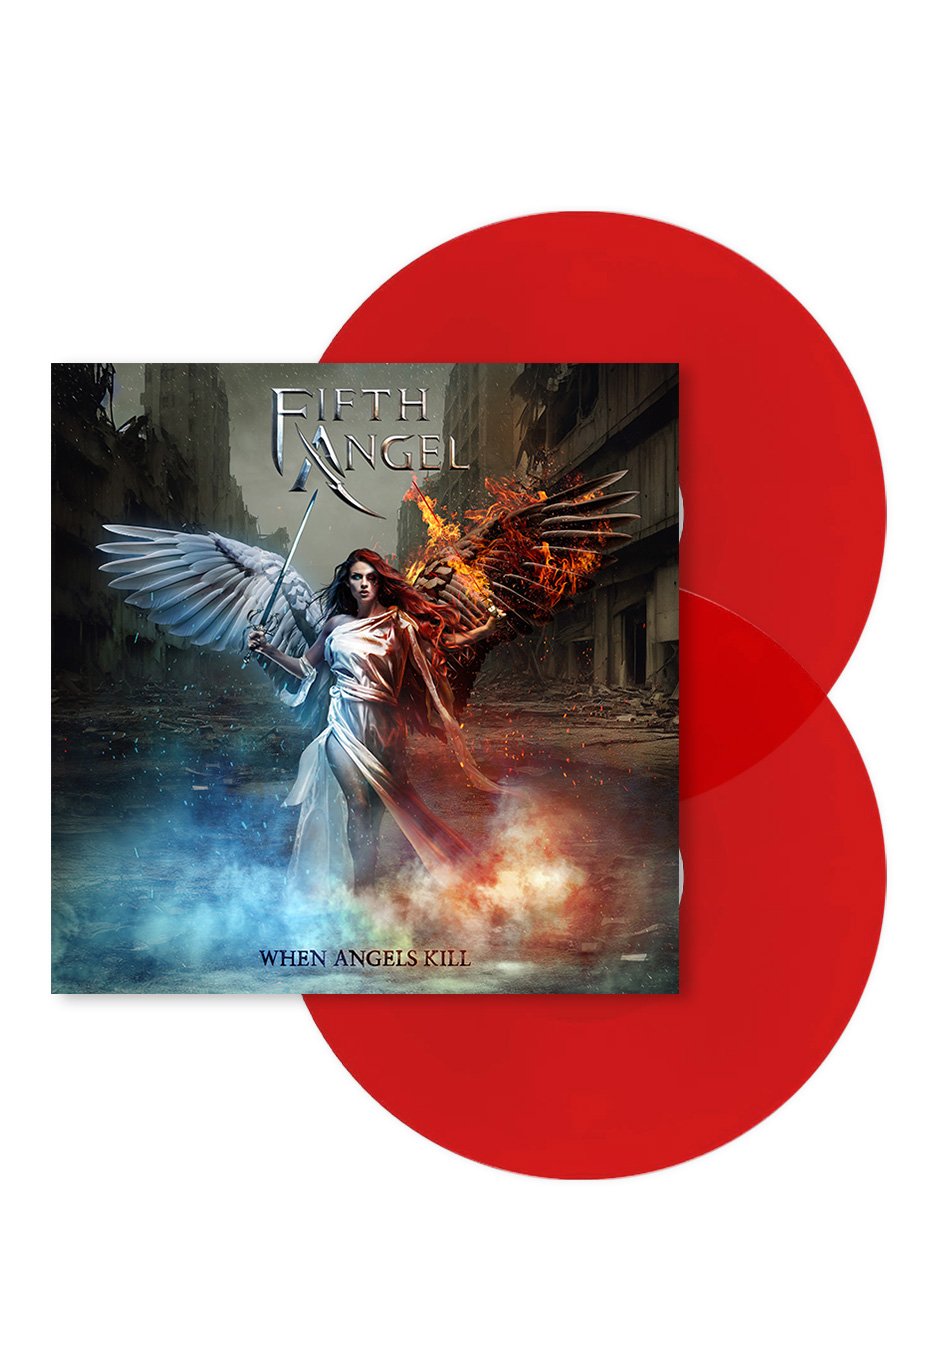 Fifth Angel - When Angels Kill Ltd. Transparent Red - 2 Colored Vinyl